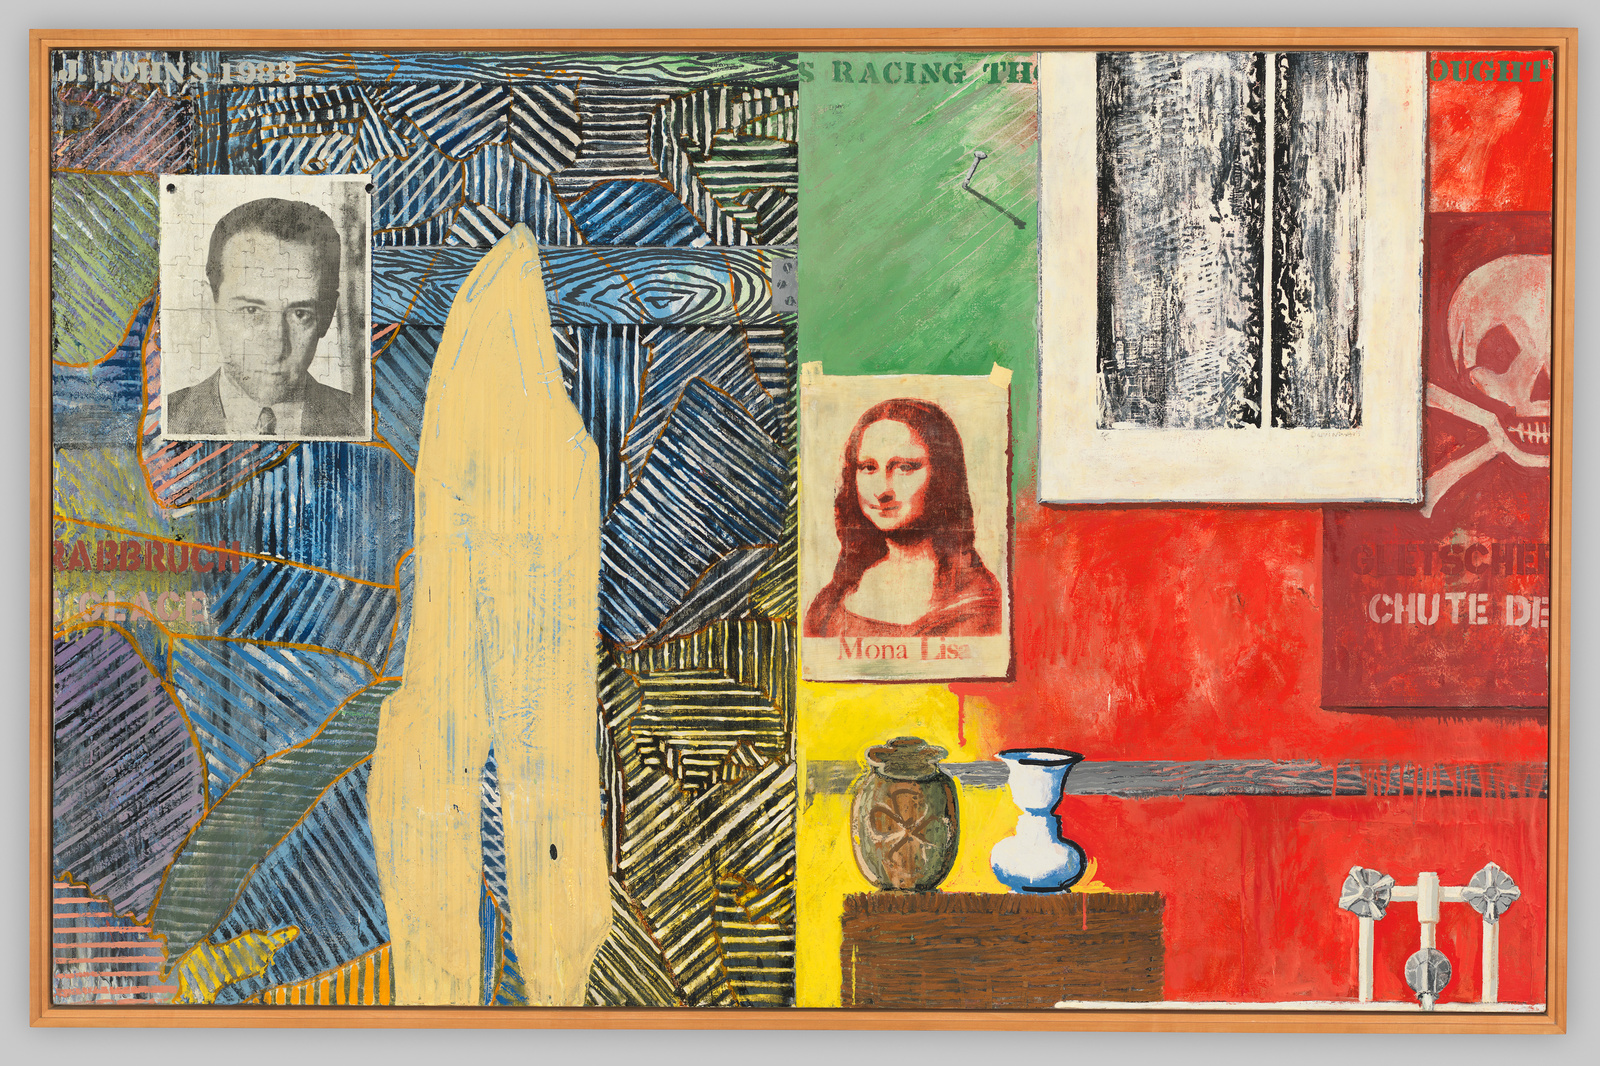 A reproduction of Mona Lisa, two ceramic vases, stenciled letters, and a photo of a white man, collaged on two panels.